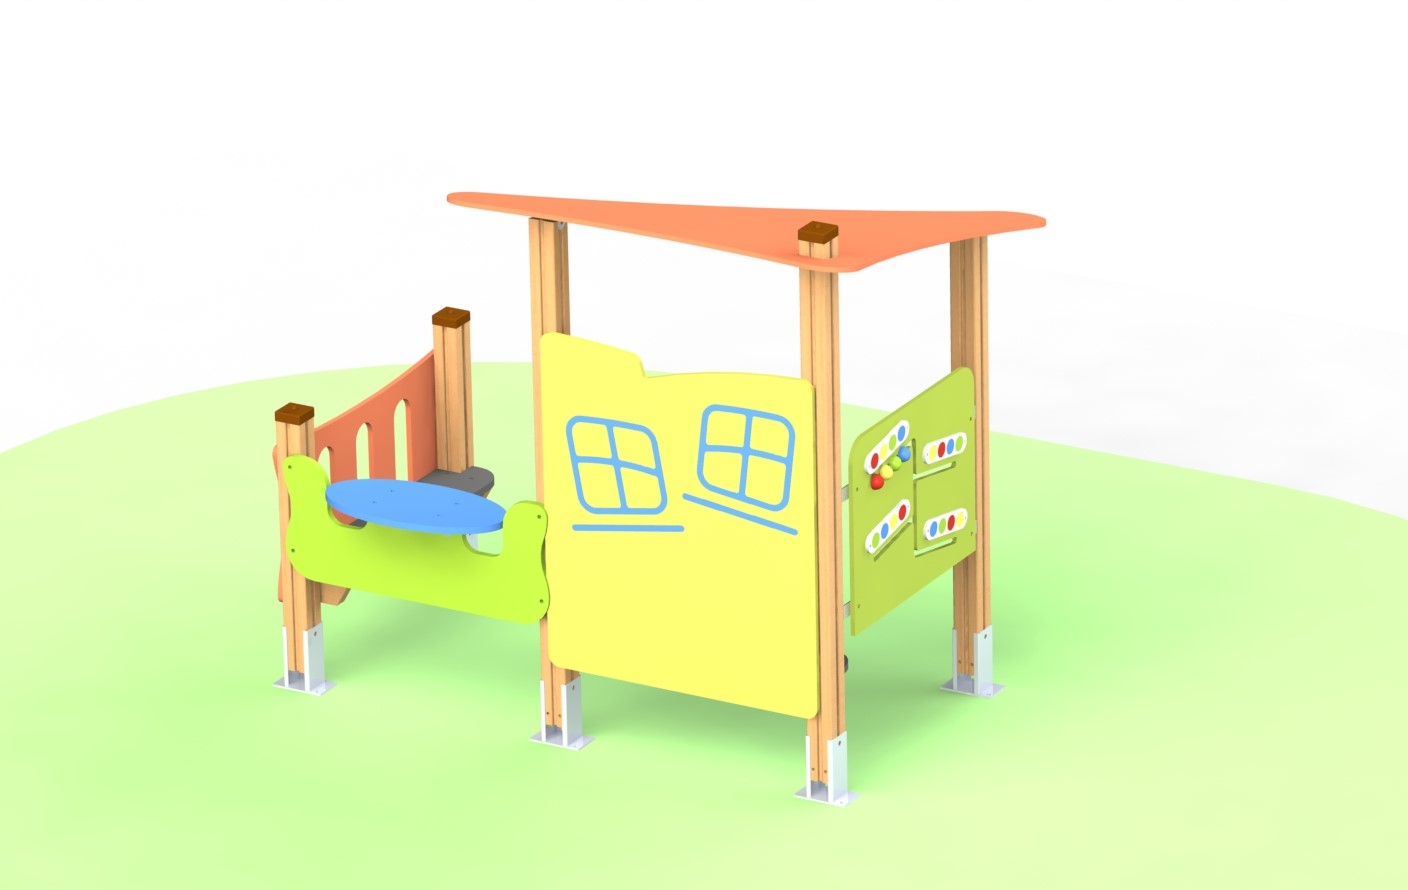 Children’s play house with benches and entertaining games, Б30 model